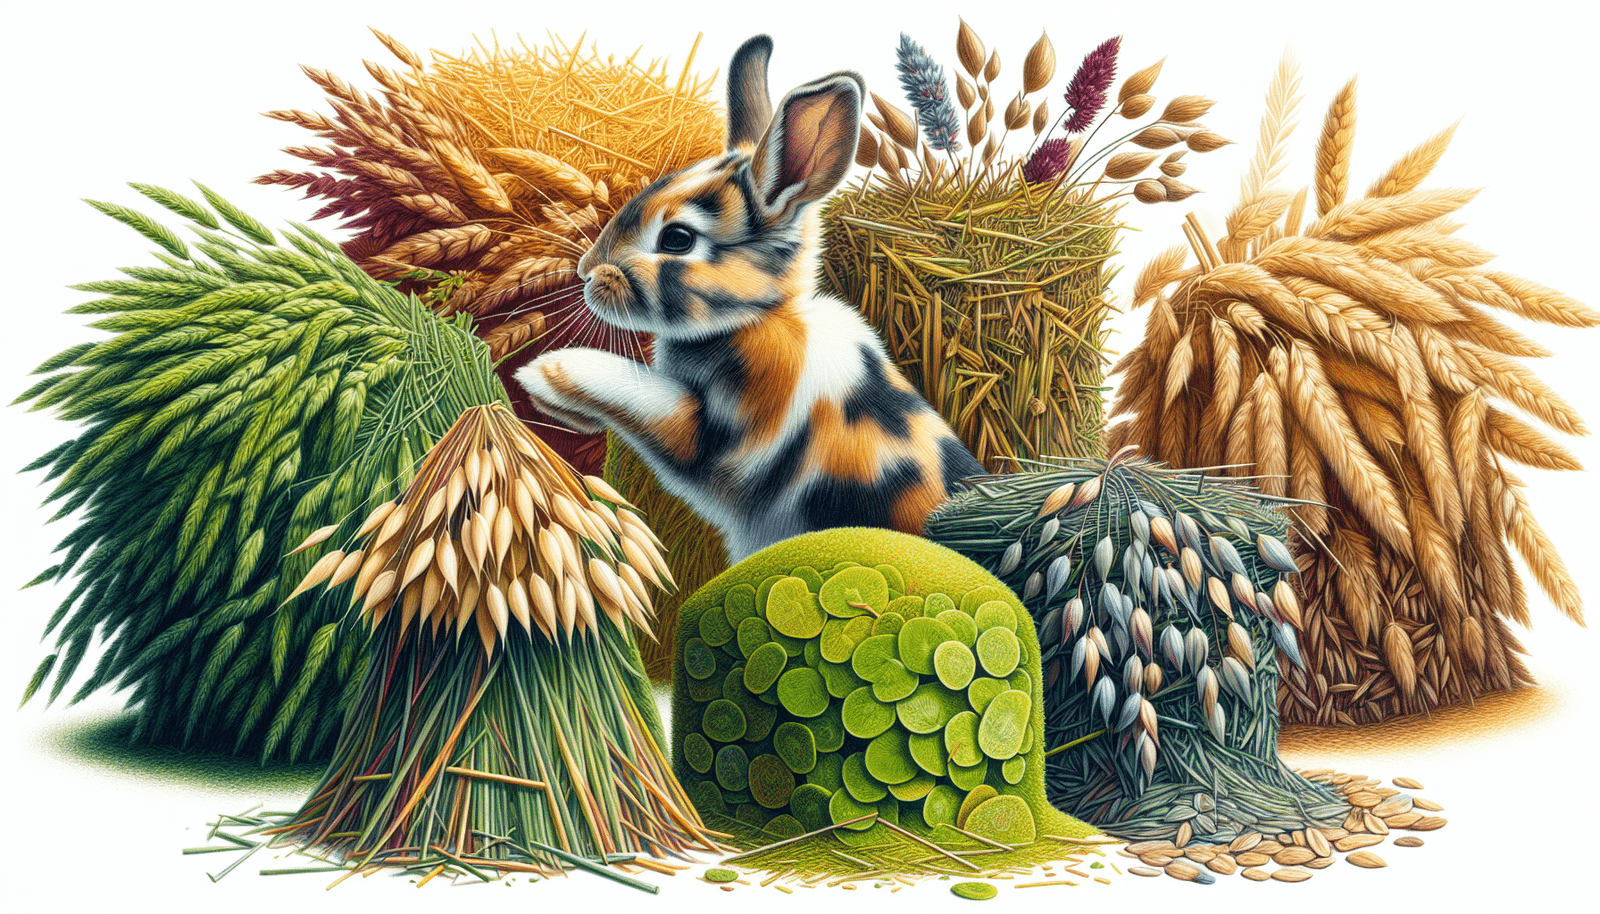 Artistic representation of various types of hay